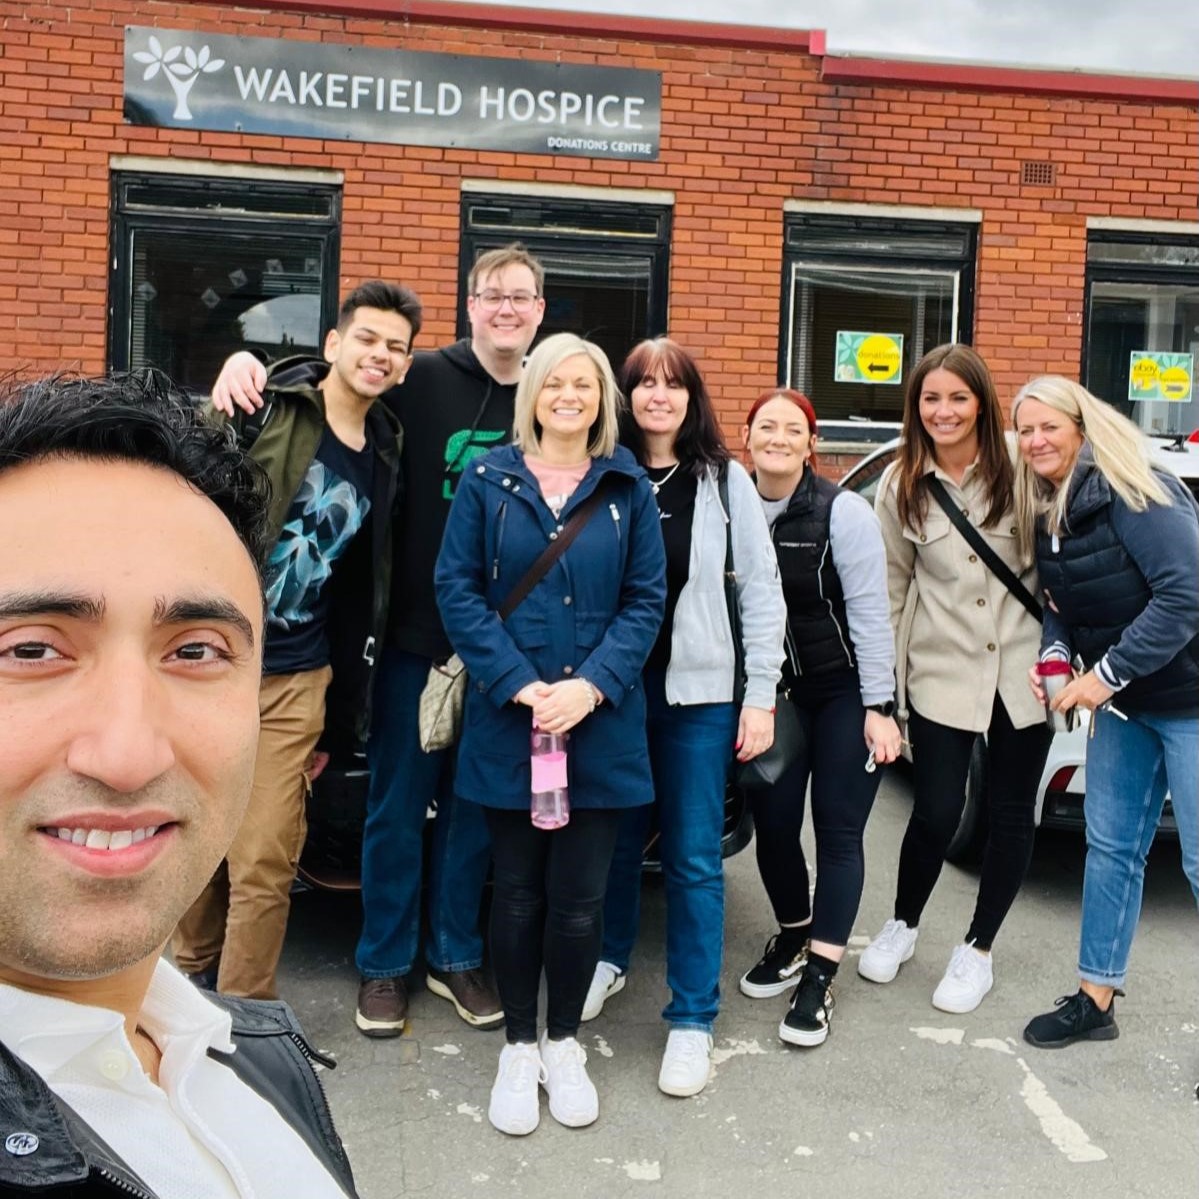 🗣 'We all had a great time, the whole team at the Warehouse were great and super welcoming... we’ll definitely be back!' A big thank you to the team from @firstdirect who spent the day volunteering at our #DonationWarehouse last month! The team helped to sort and manage stock